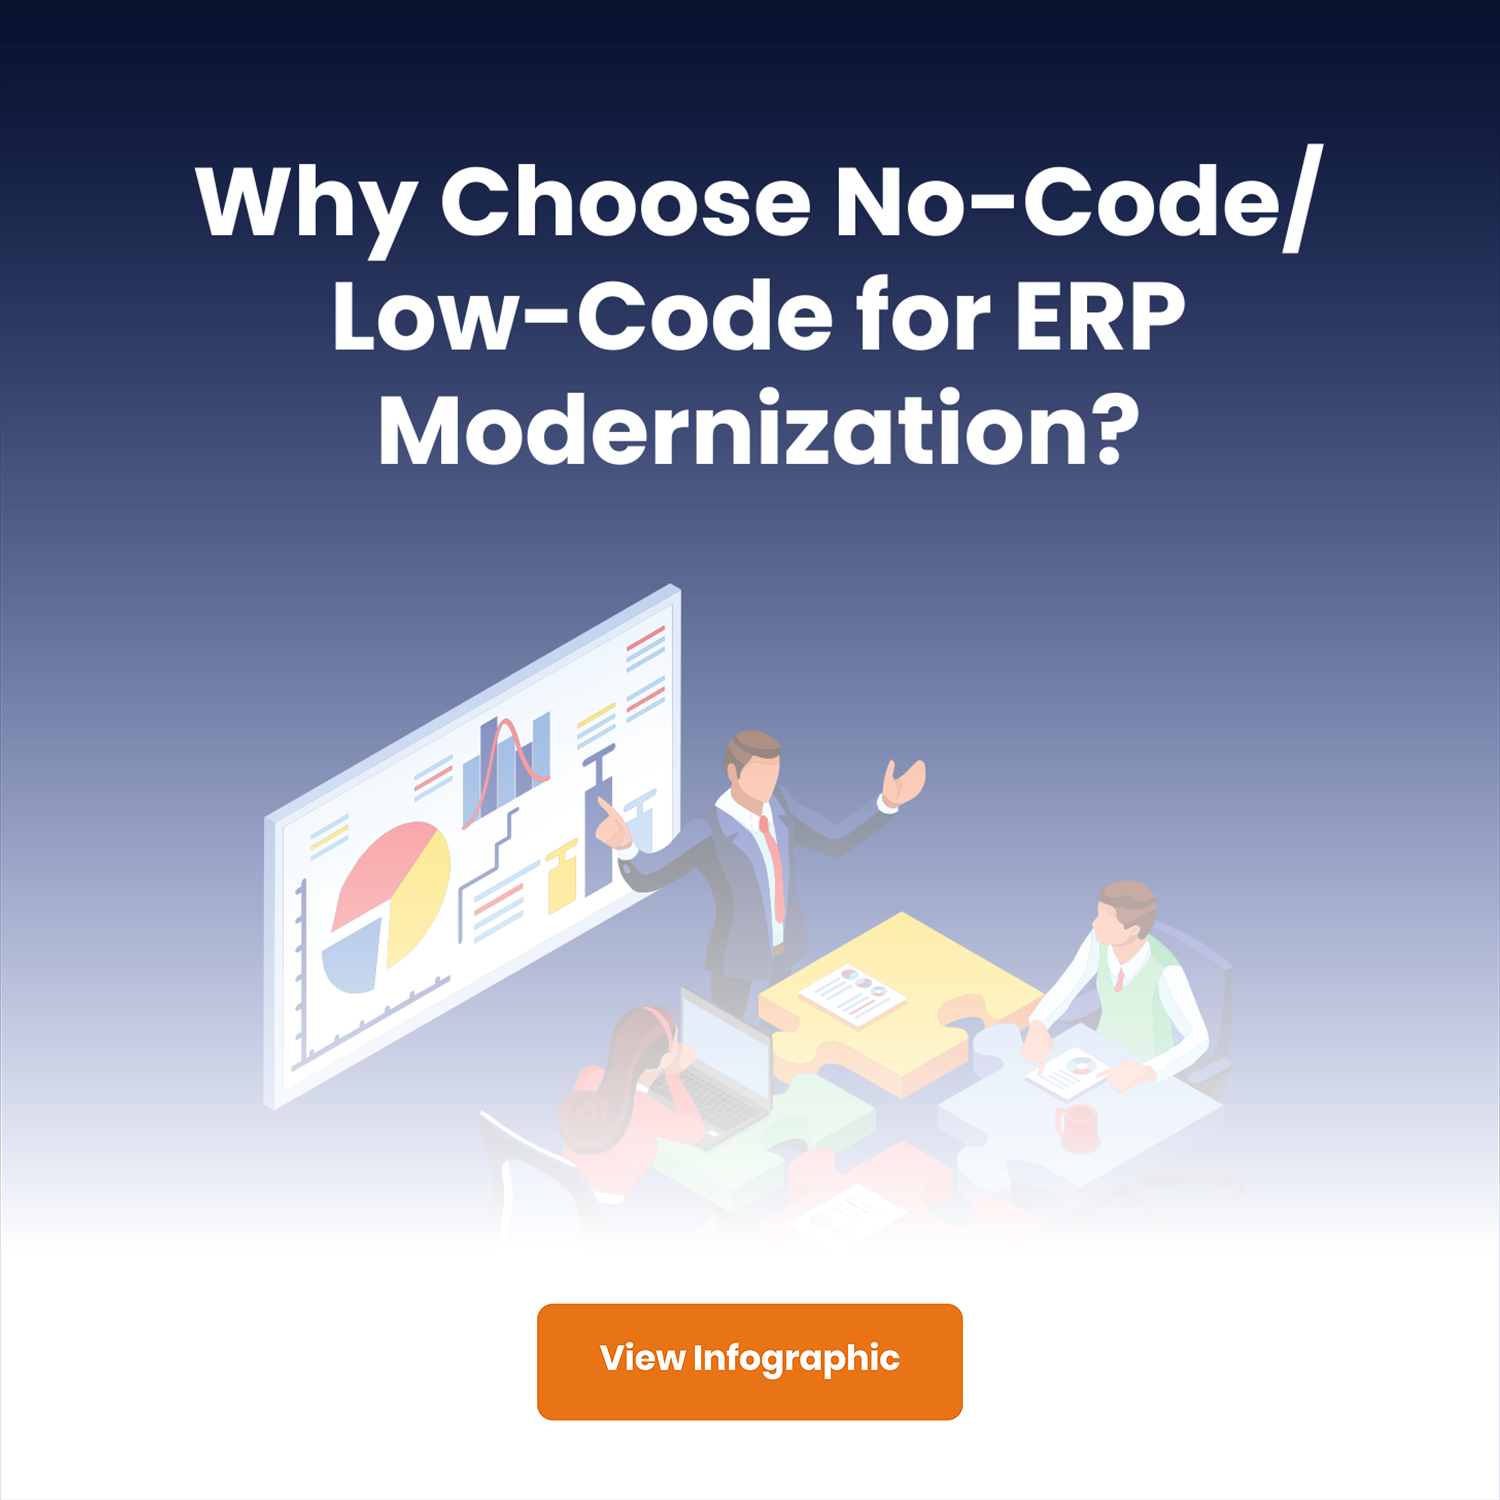 No-Code Low-Code for ERP Modernization Infographic